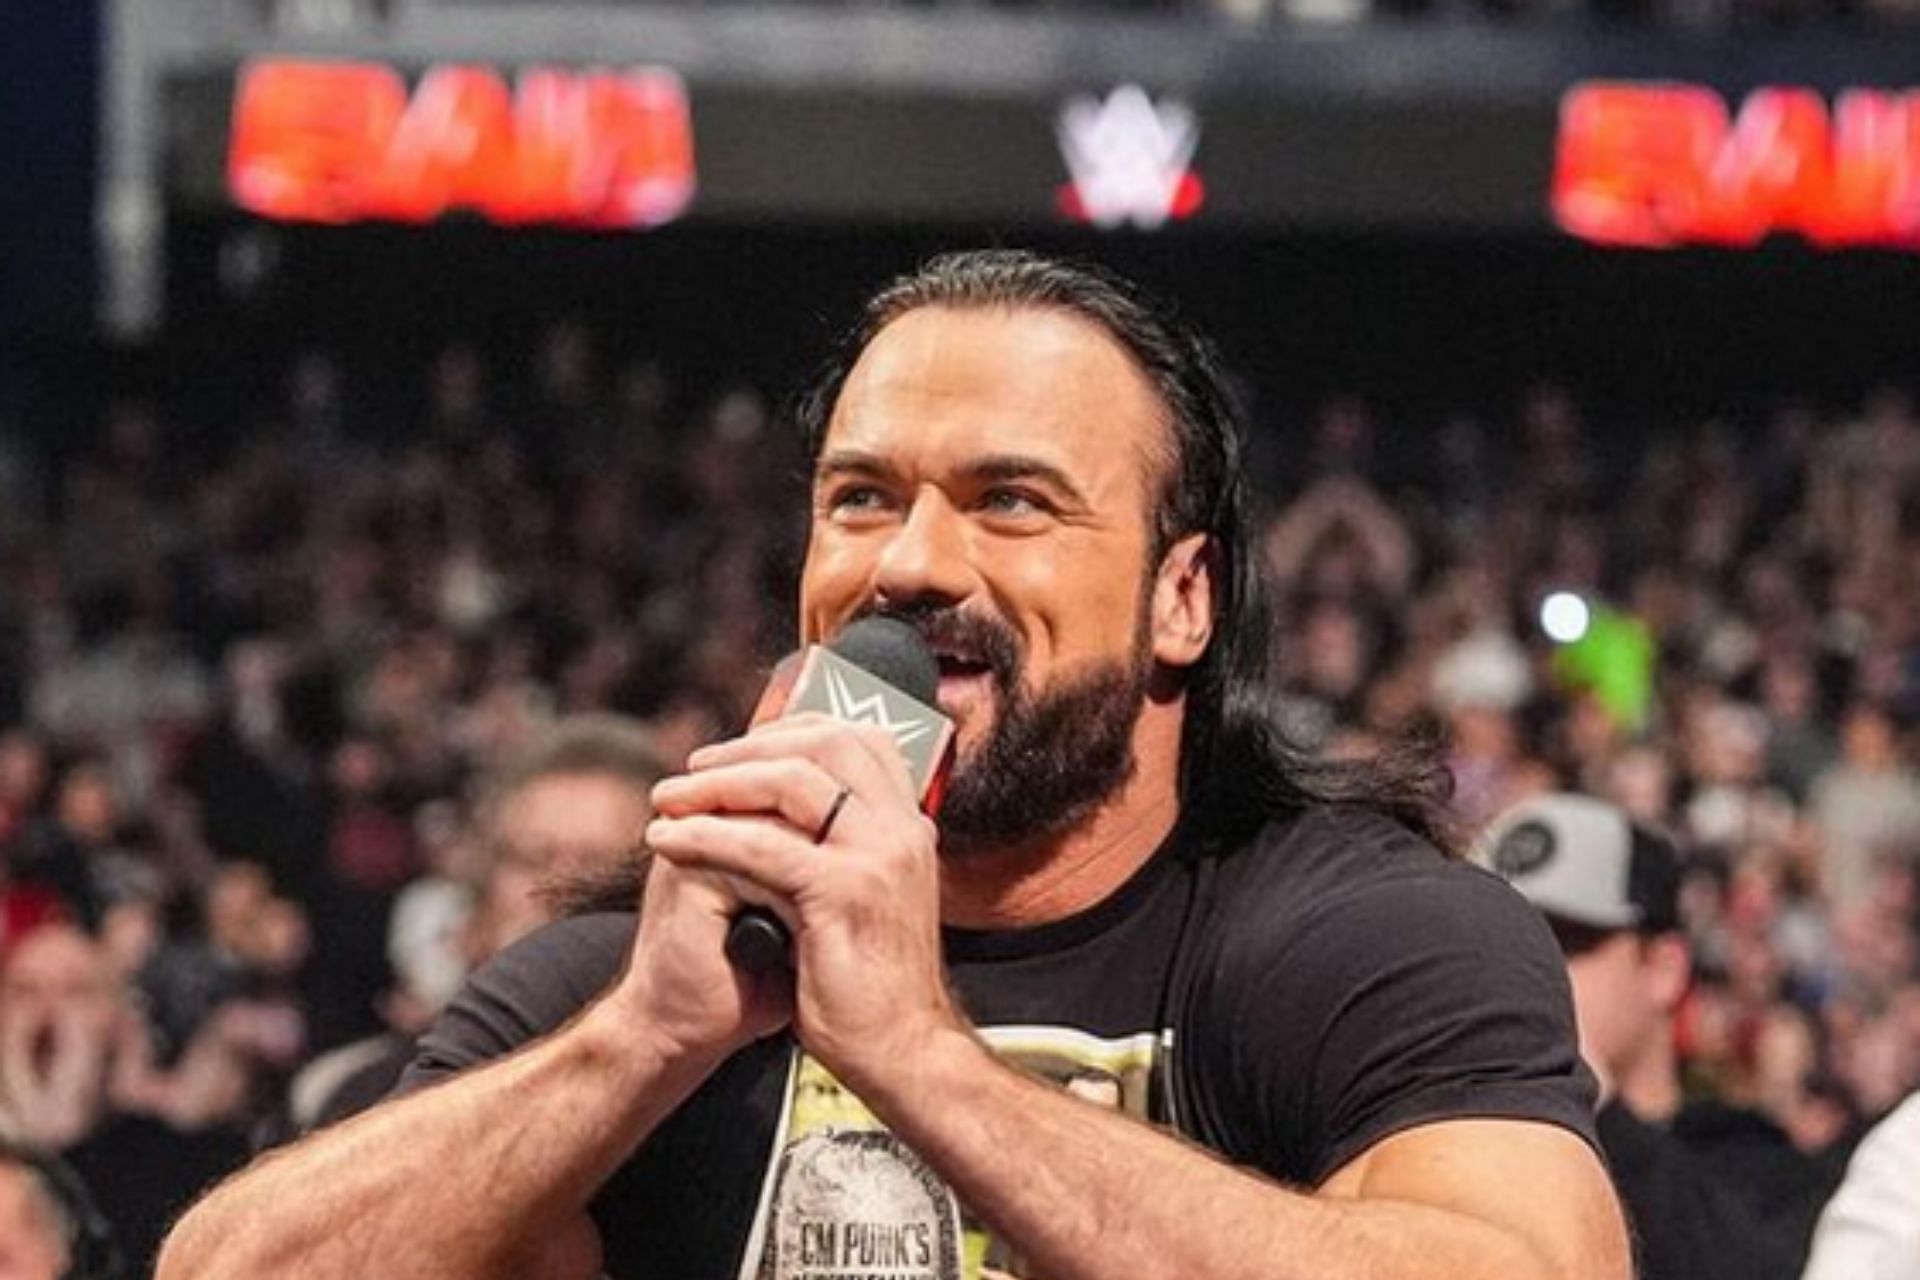 Wrestling fans are referencing Drew McIntyre due to an AEW storyline online